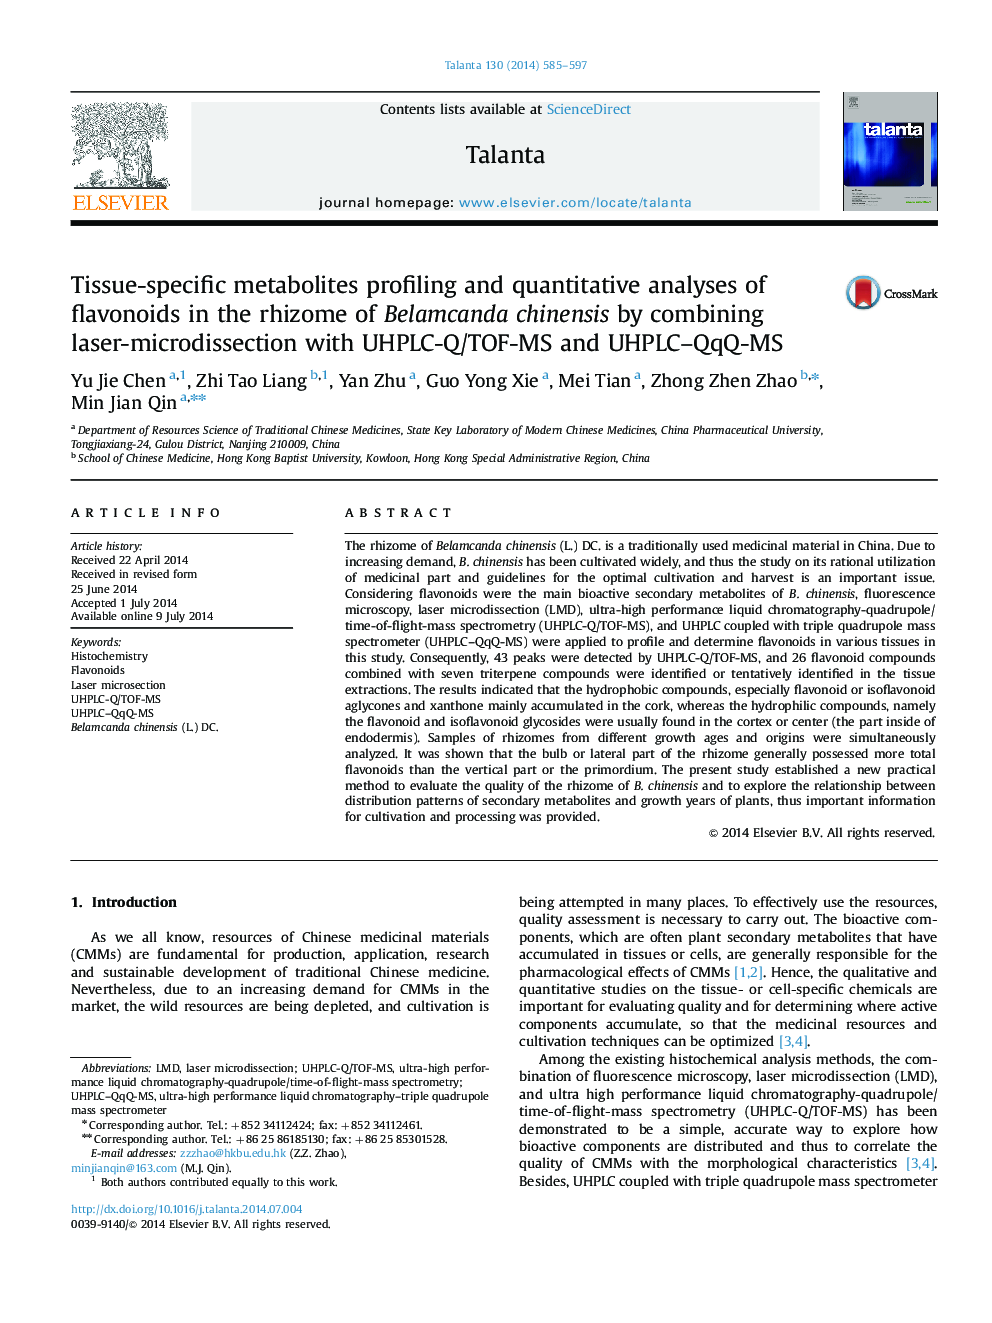 Tissue-specific metabolites profiling and quantitative analyses of flavonoids in the rhizome of Belamcanda chinensis by combining laser-microdissection with UHPLC-Q/TOF-MS and UHPLC–QqQ-MS